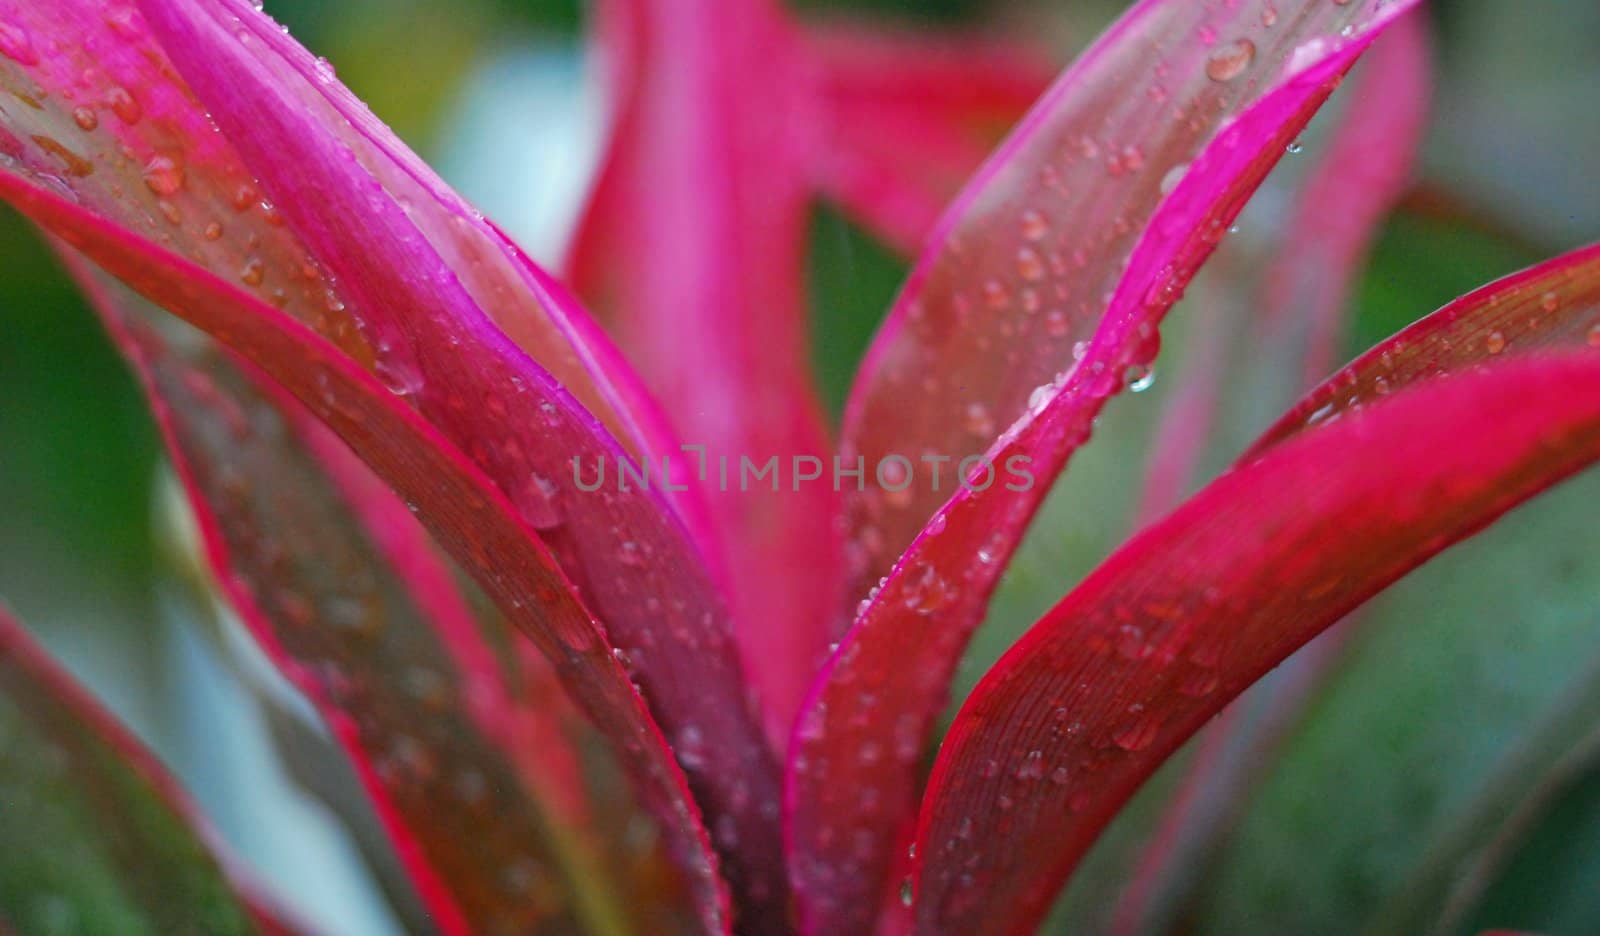 Raindrops on leaf by seattlephoto